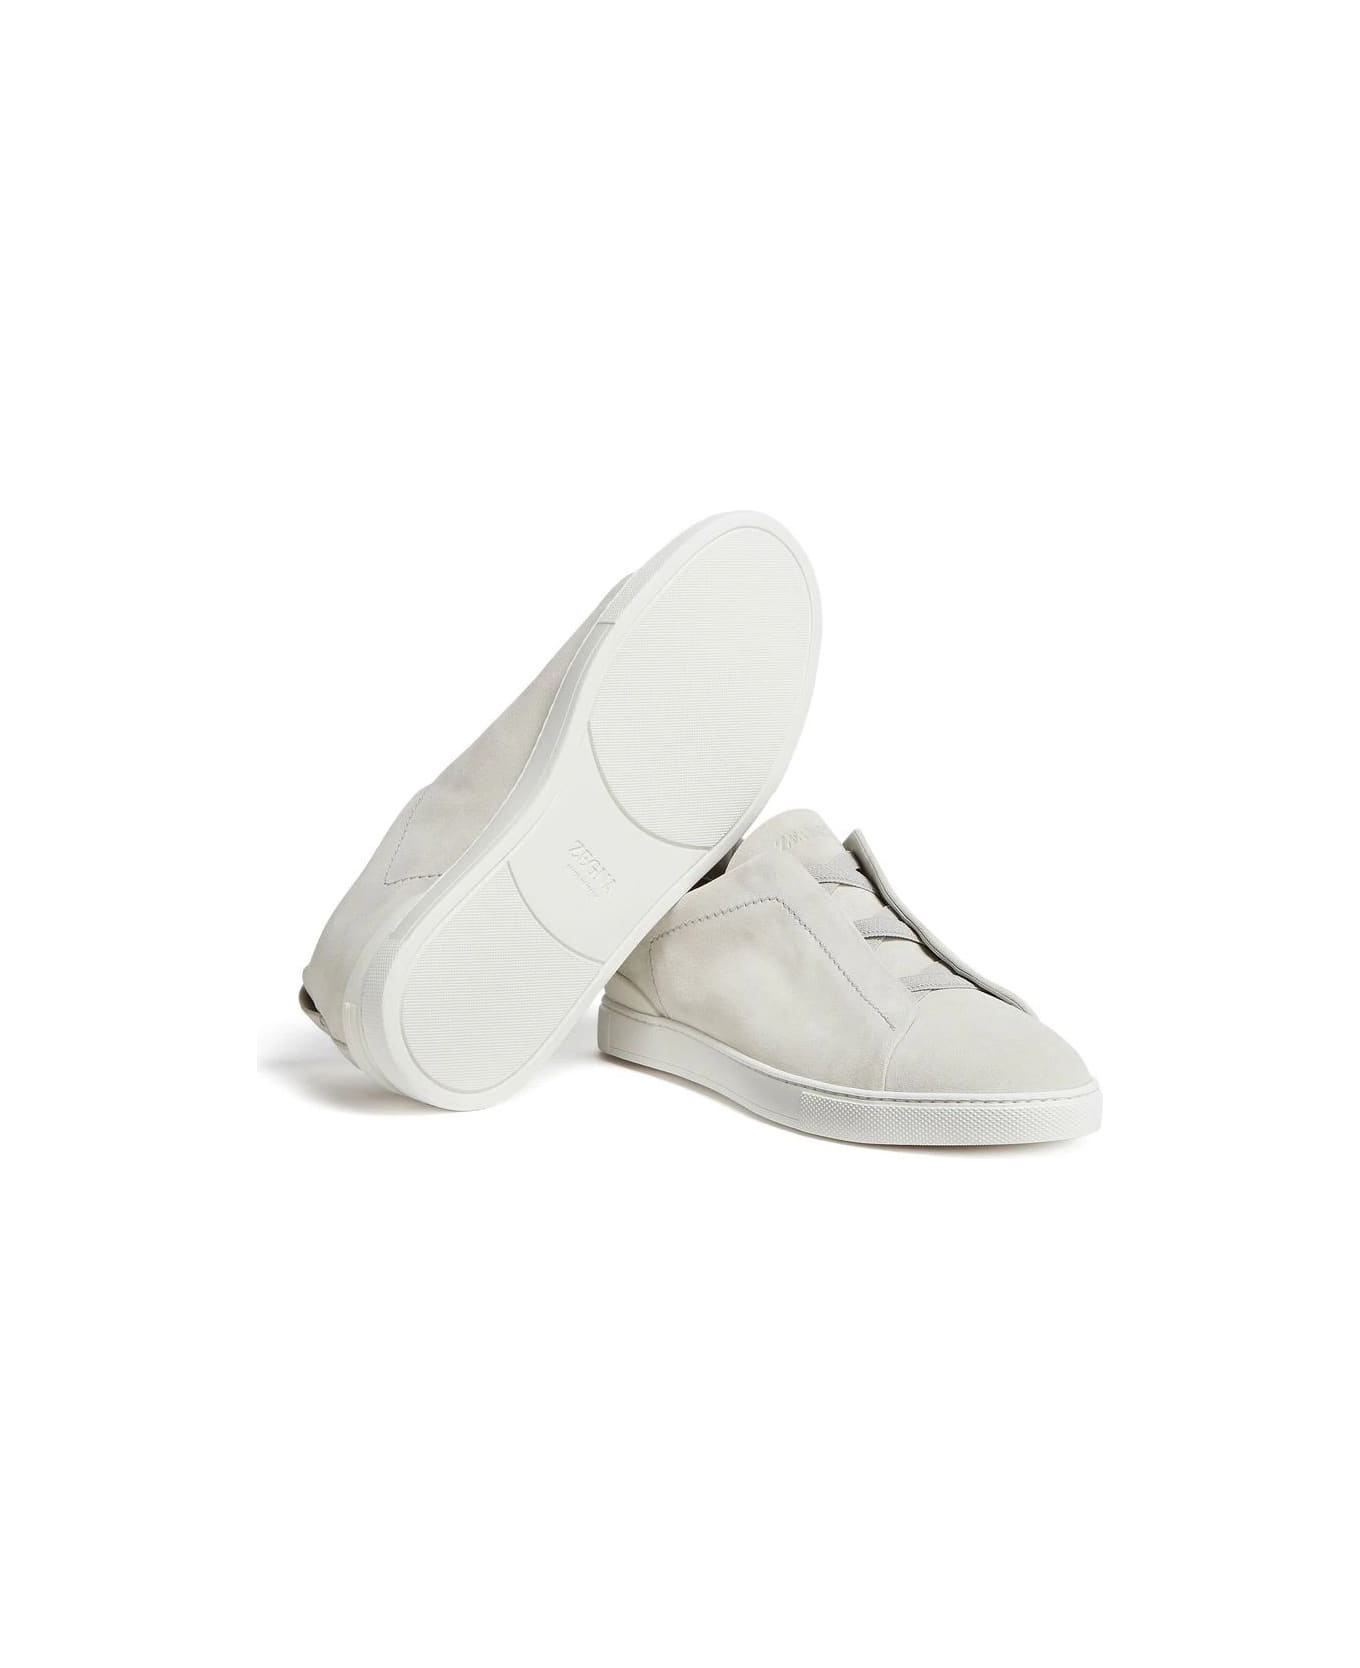 Zegna Triple Stitch Sneakers In White Suede - White スニーカー